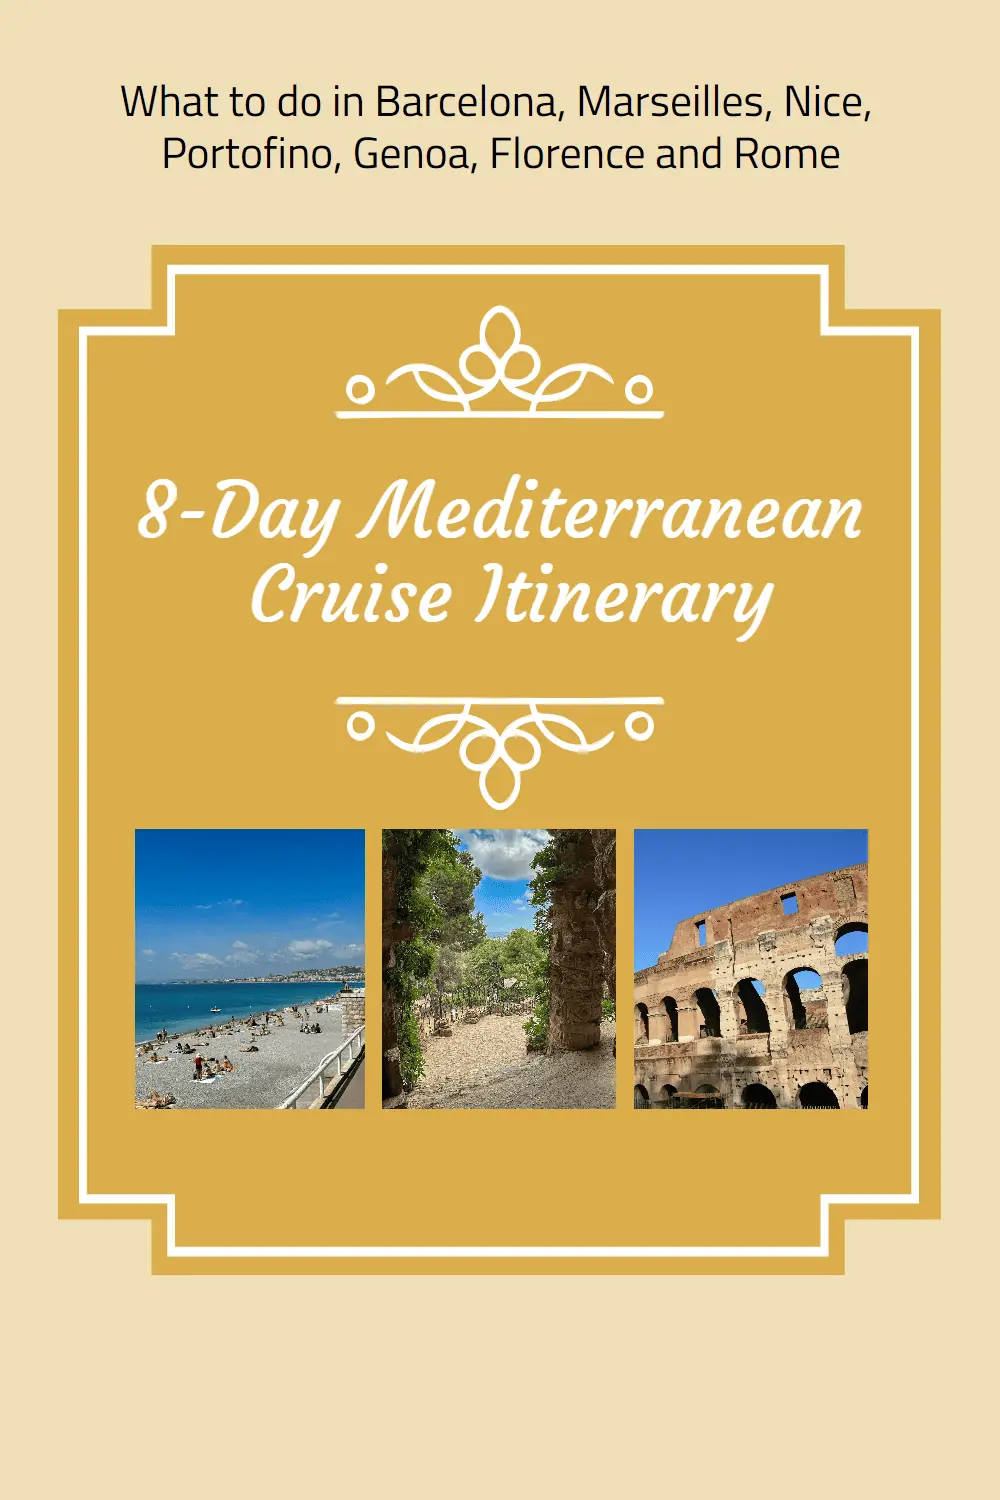 Read on for inspiration for your next Mediterranean cruise. #Europeancruising #Italy #France #Spain